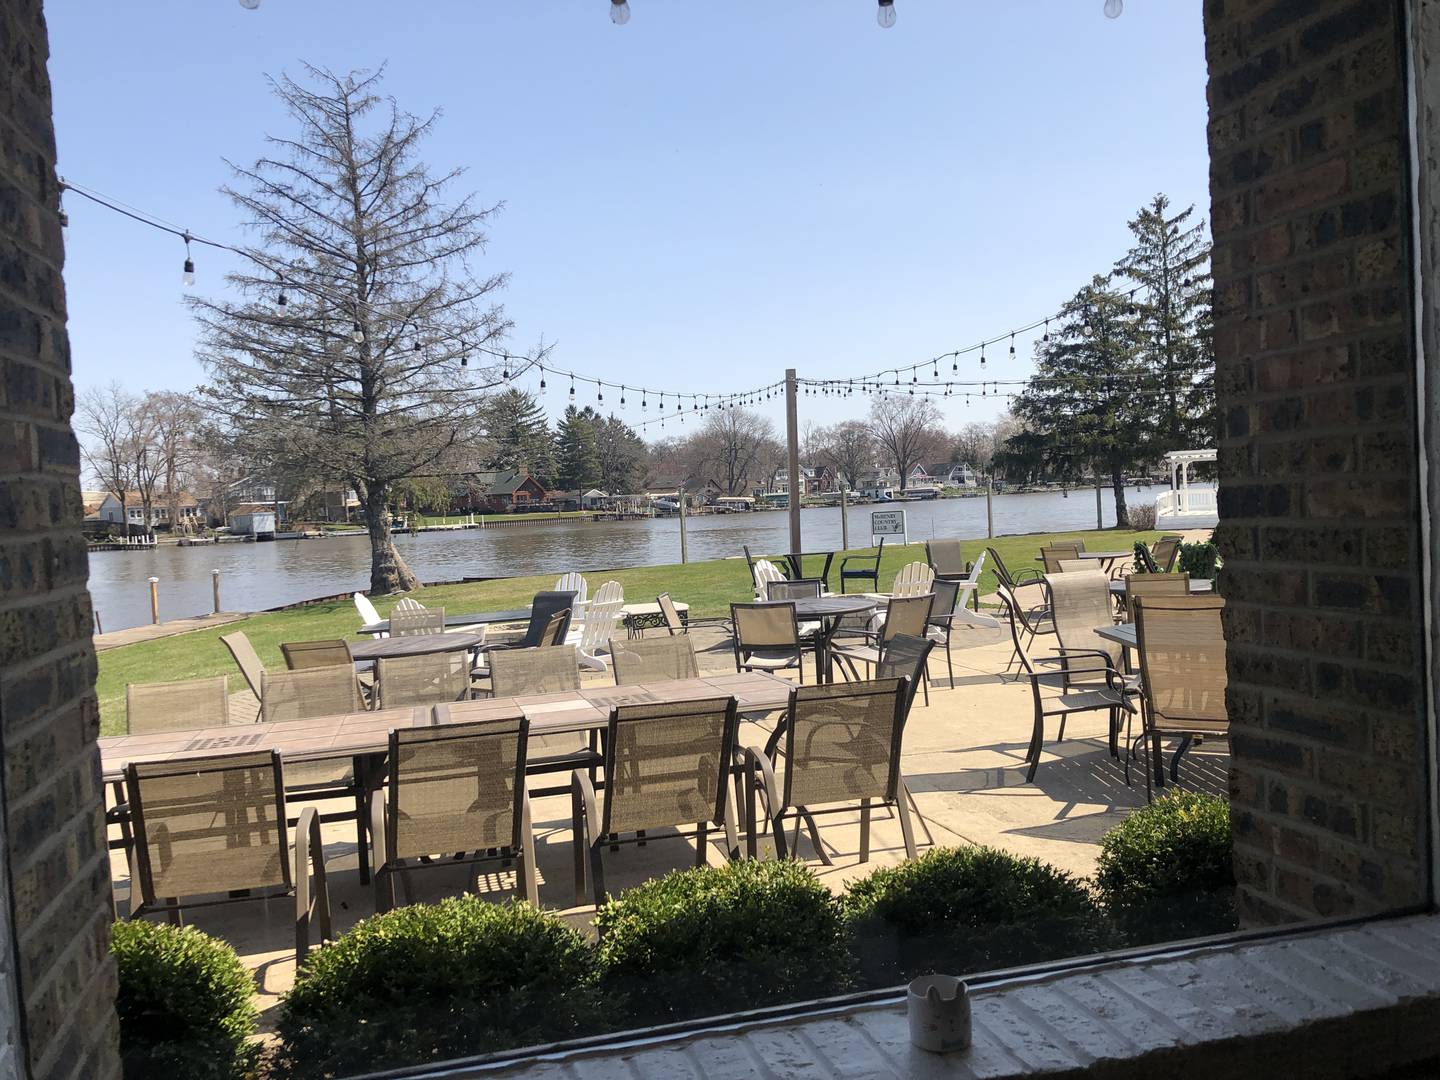 Overlooking a channel off the Fox River from the dining room at the Metalwood Grille, McHenry.